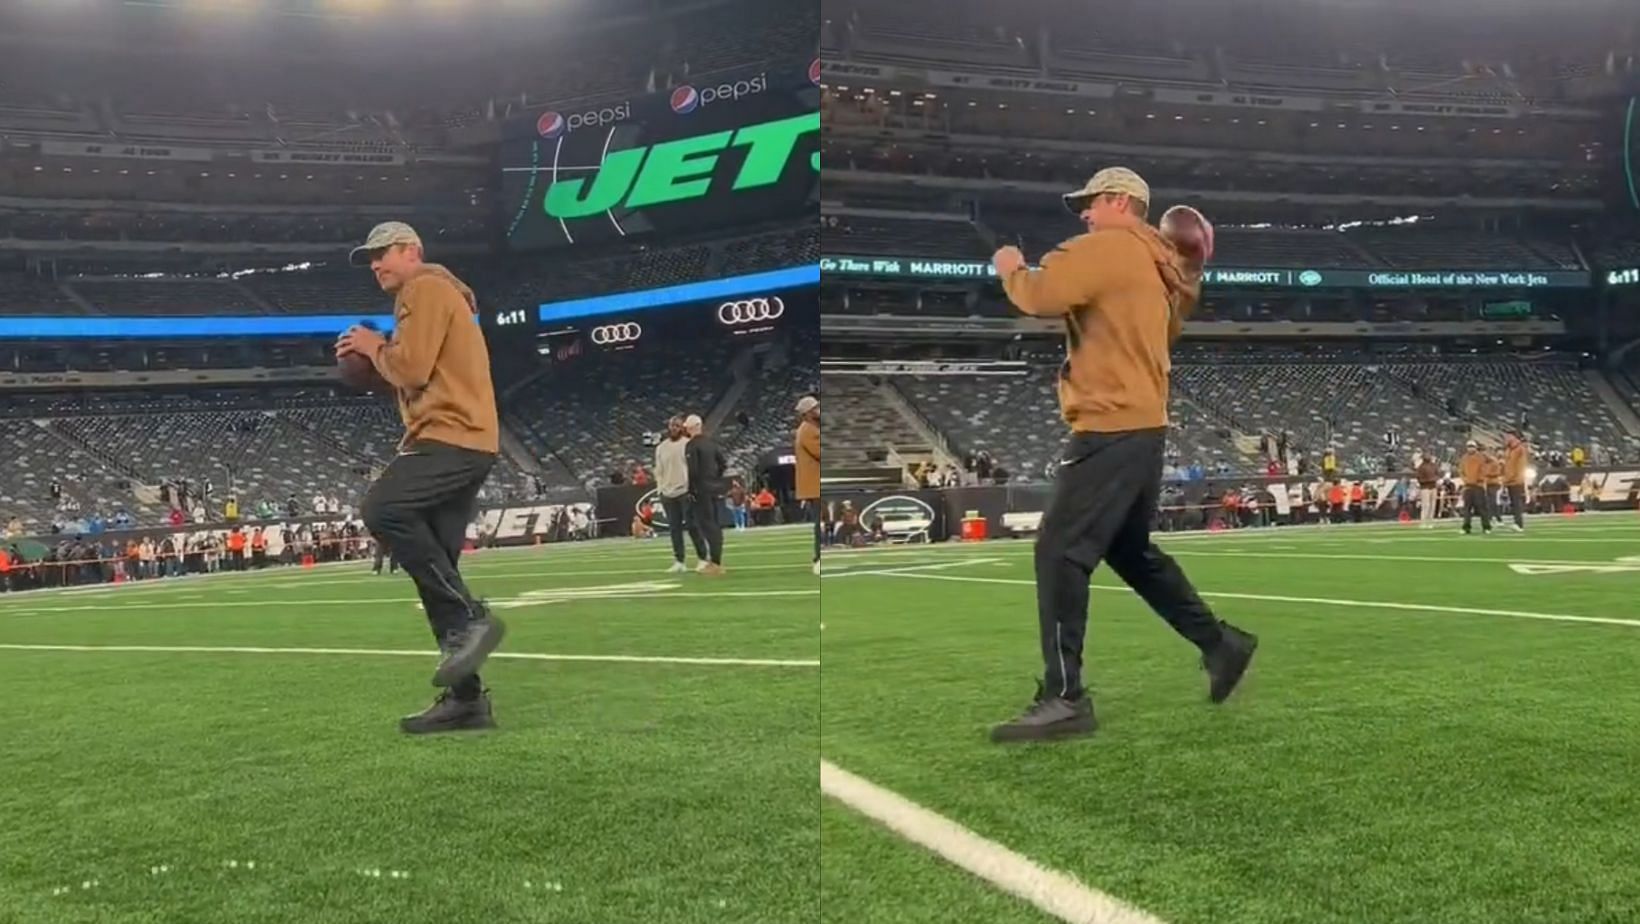 Aaron Rodgers was throwing prior to the Jets